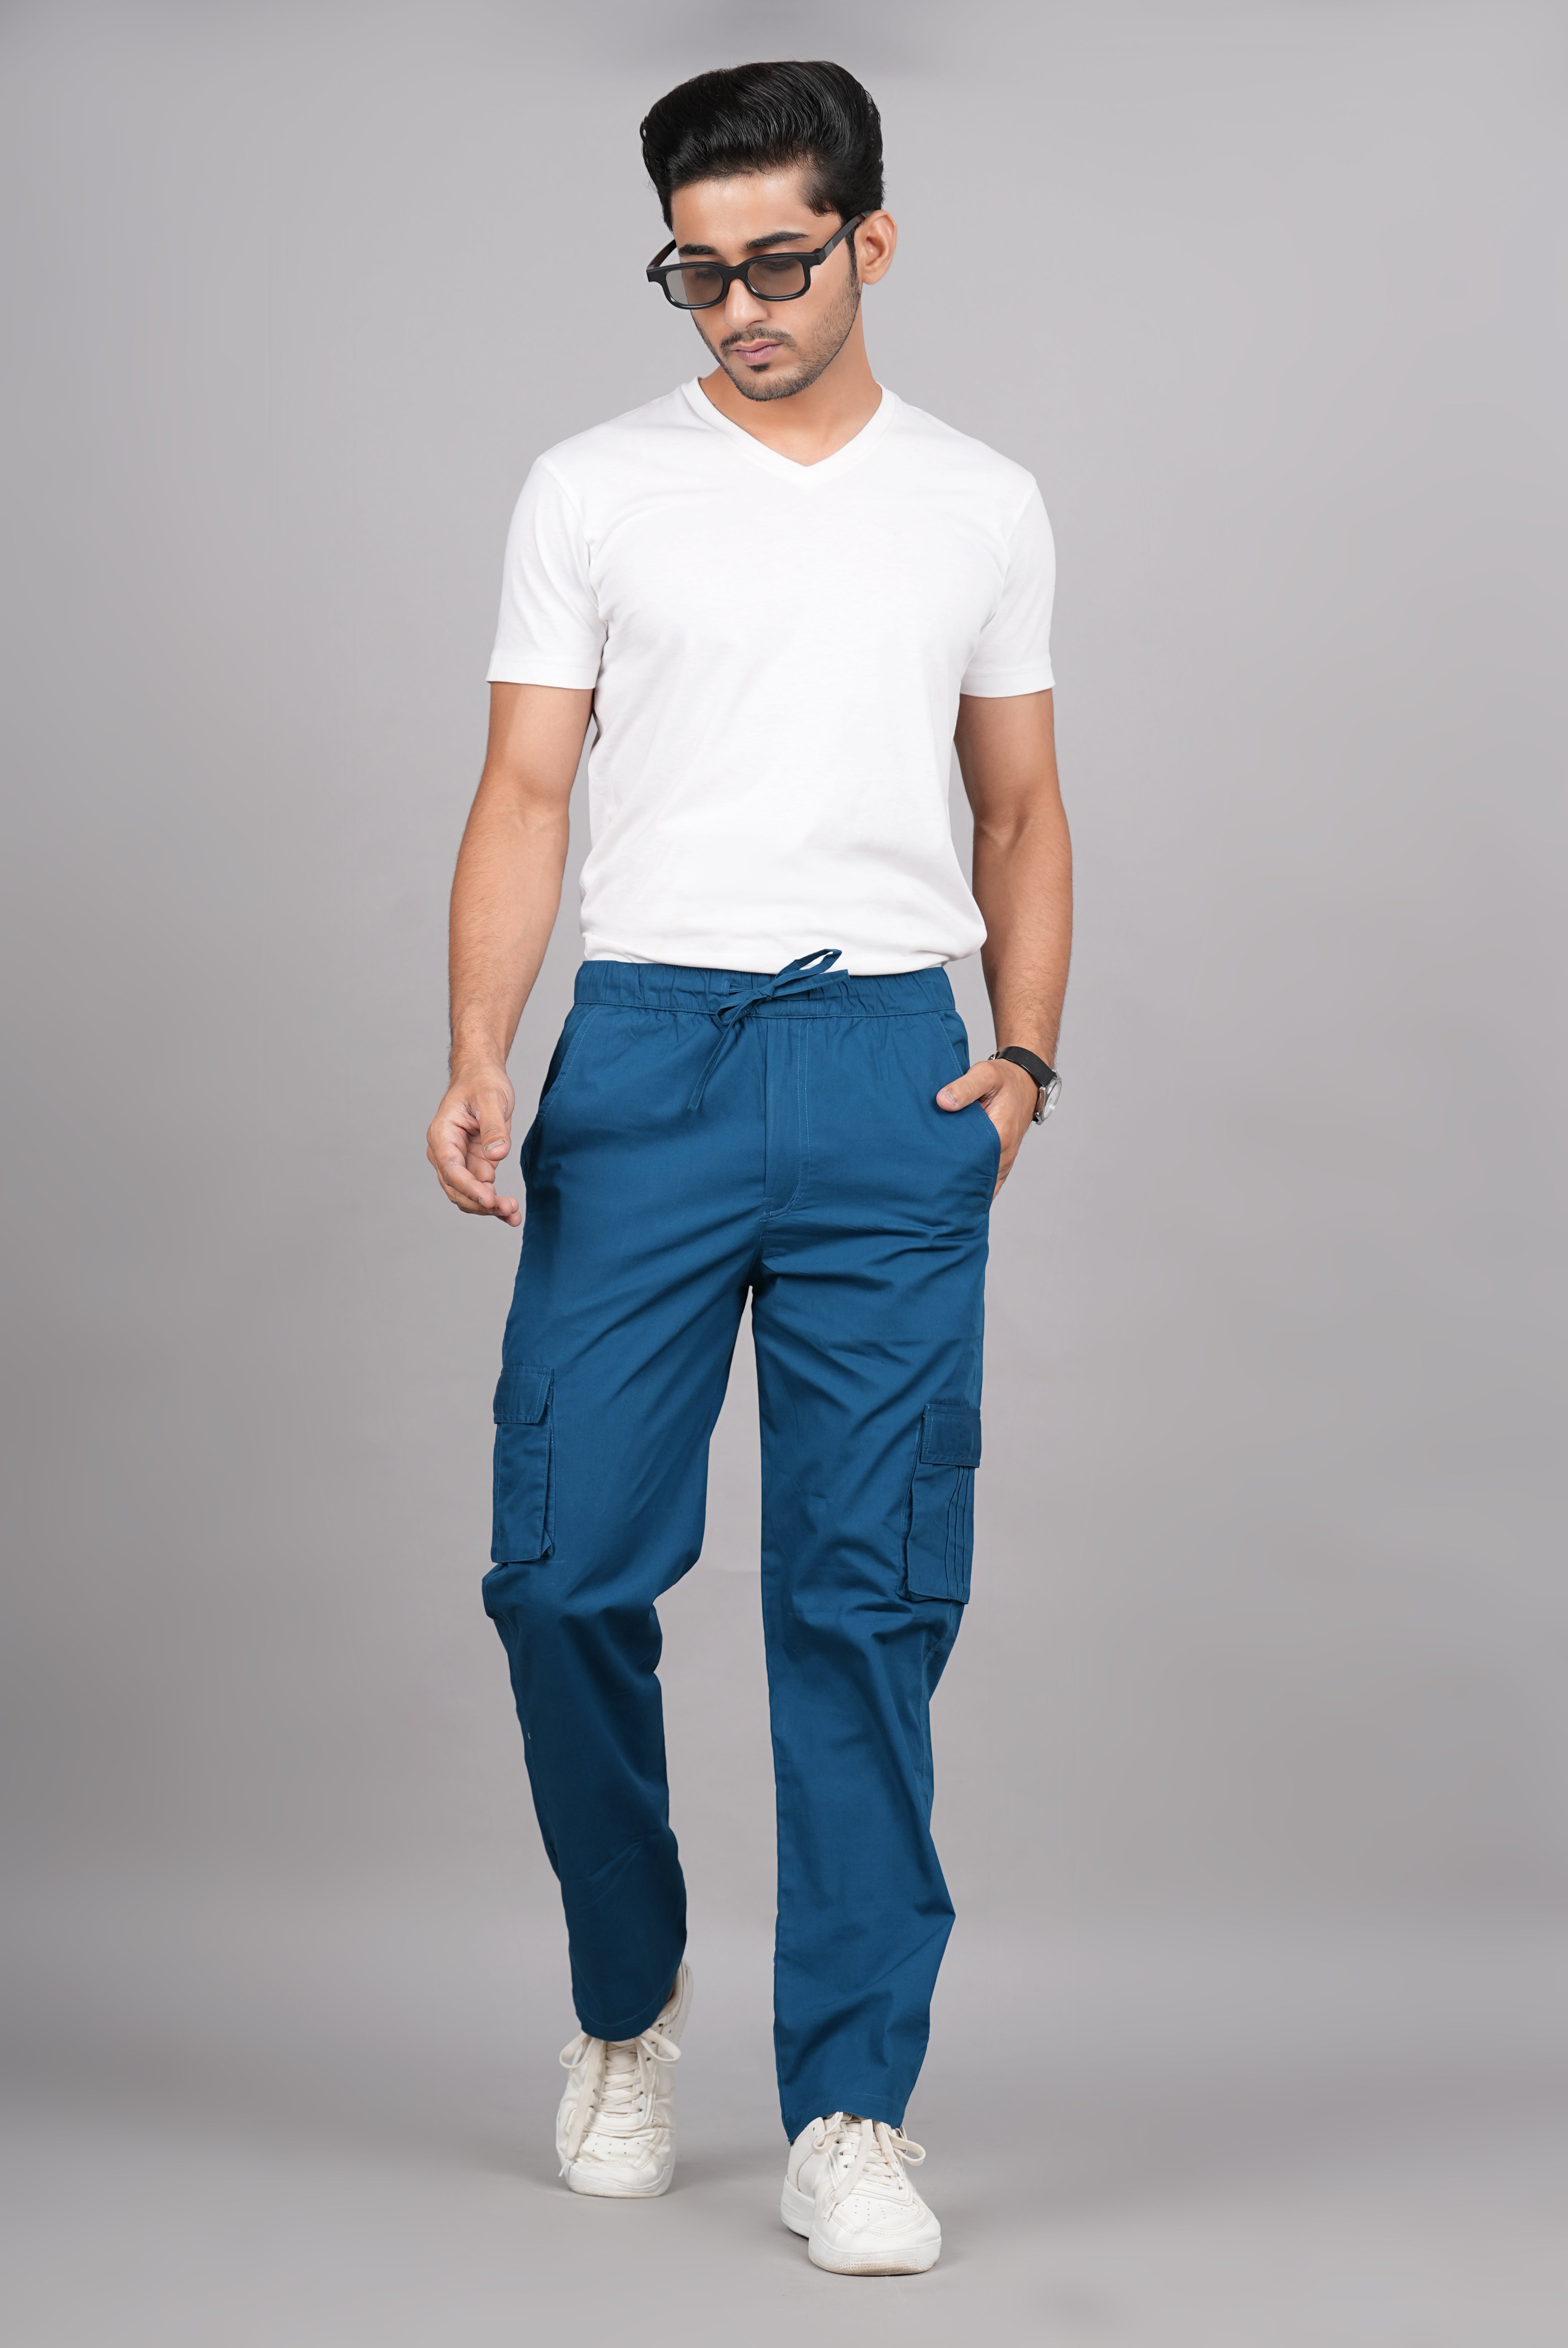 Buy House of RP Men's Cotton DarkBlue Slim Fit Solid Cargos, Casual  Trousers with Cargo Pockets Online at Best Price